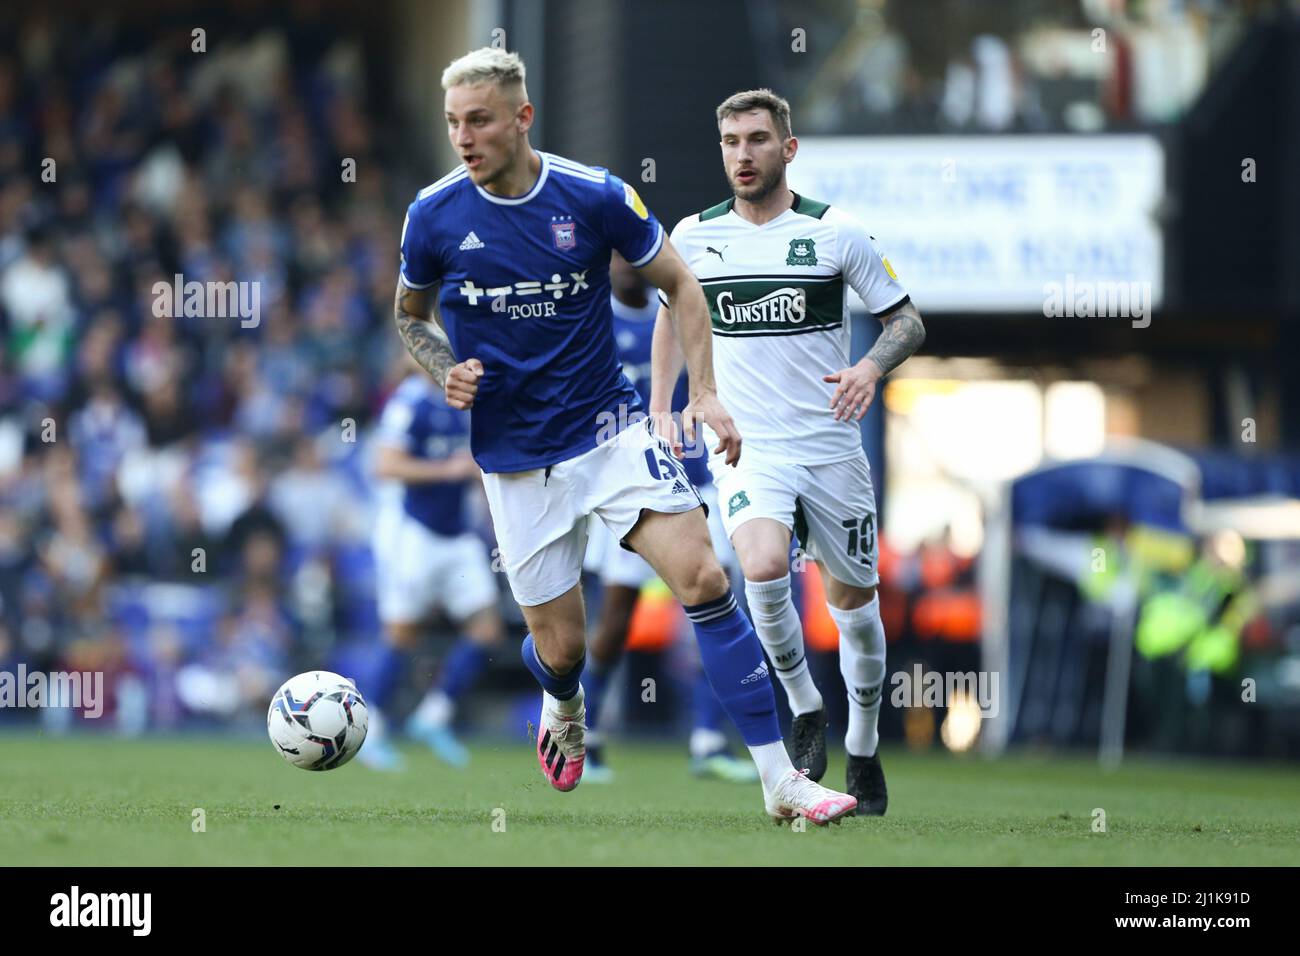 Ipswich, UK. 26th Mar, 2022. Luke Woolfenden #6 of Ipswich Town on the ball in Ipswich, United Kingdom on 3/26/2022. (Photo by Arron Gent/News Images/Sipa USA) Credit: Sipa USA/Alamy Live News Stock Photo